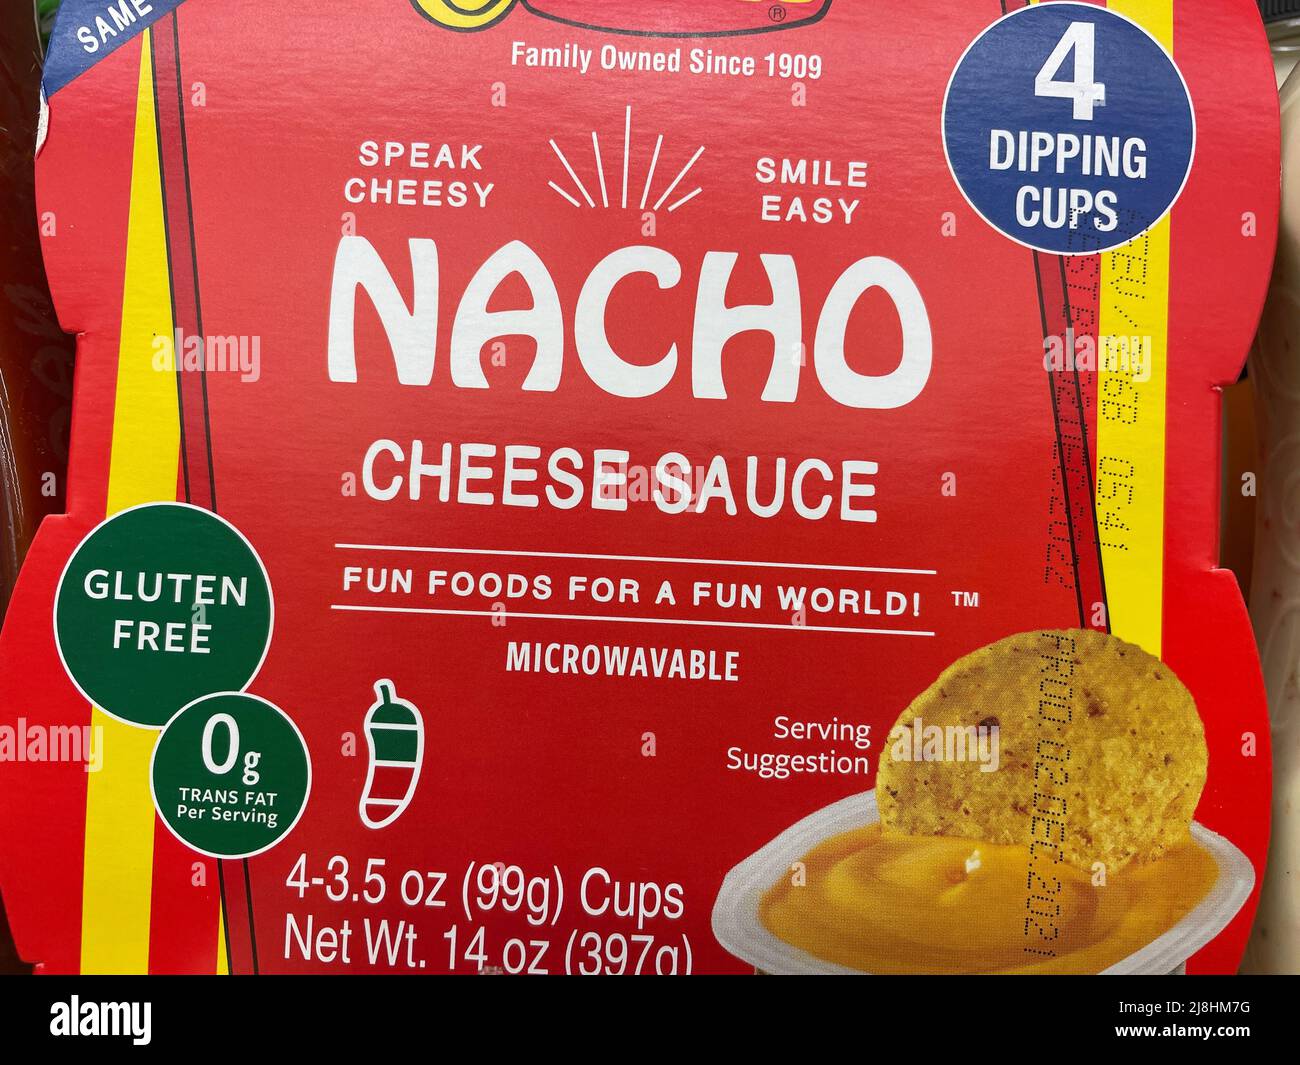 Grovetown, Ga USA - 12 15 21: Mexican products on a store shelf Nacho cheese sauce Stock Photo